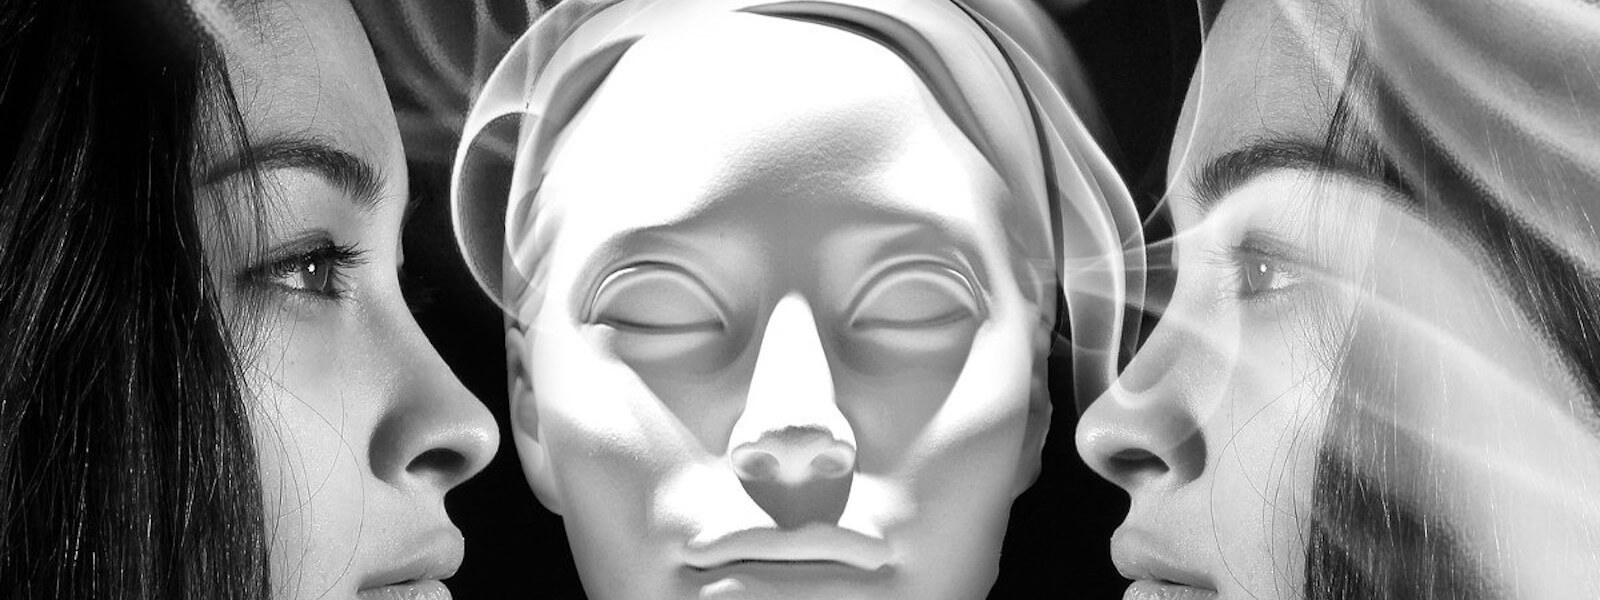 A mirrored woman is looking into her own face. A white mask is between the faces.